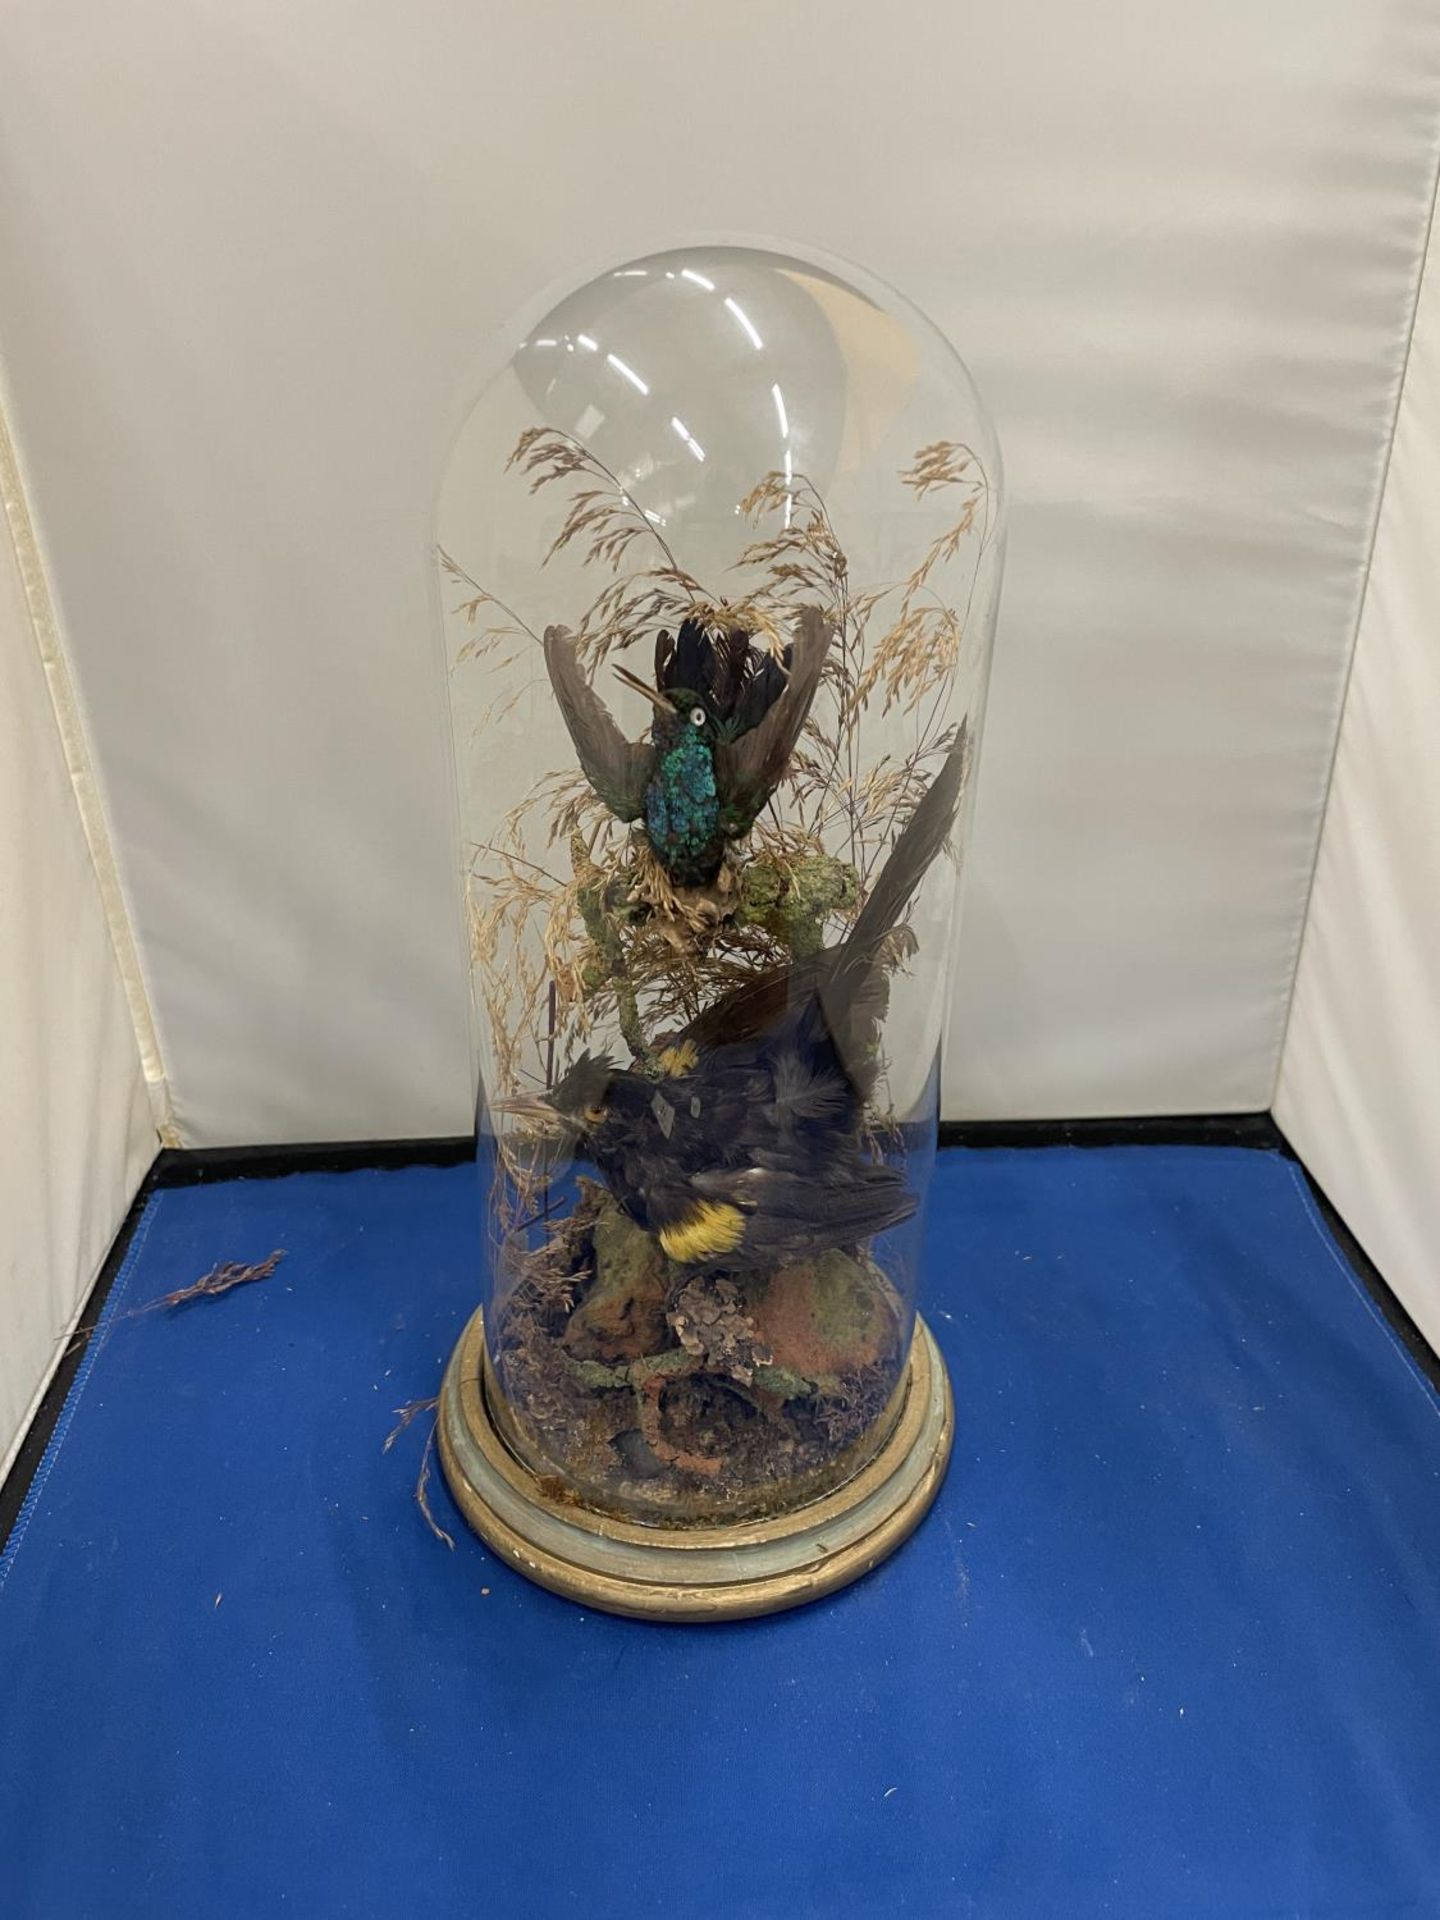 A TAXIDERMY OF TWO BIRDS ON A LOG WITH FOLIAGE IN A GLASS DOME - Image 2 of 8